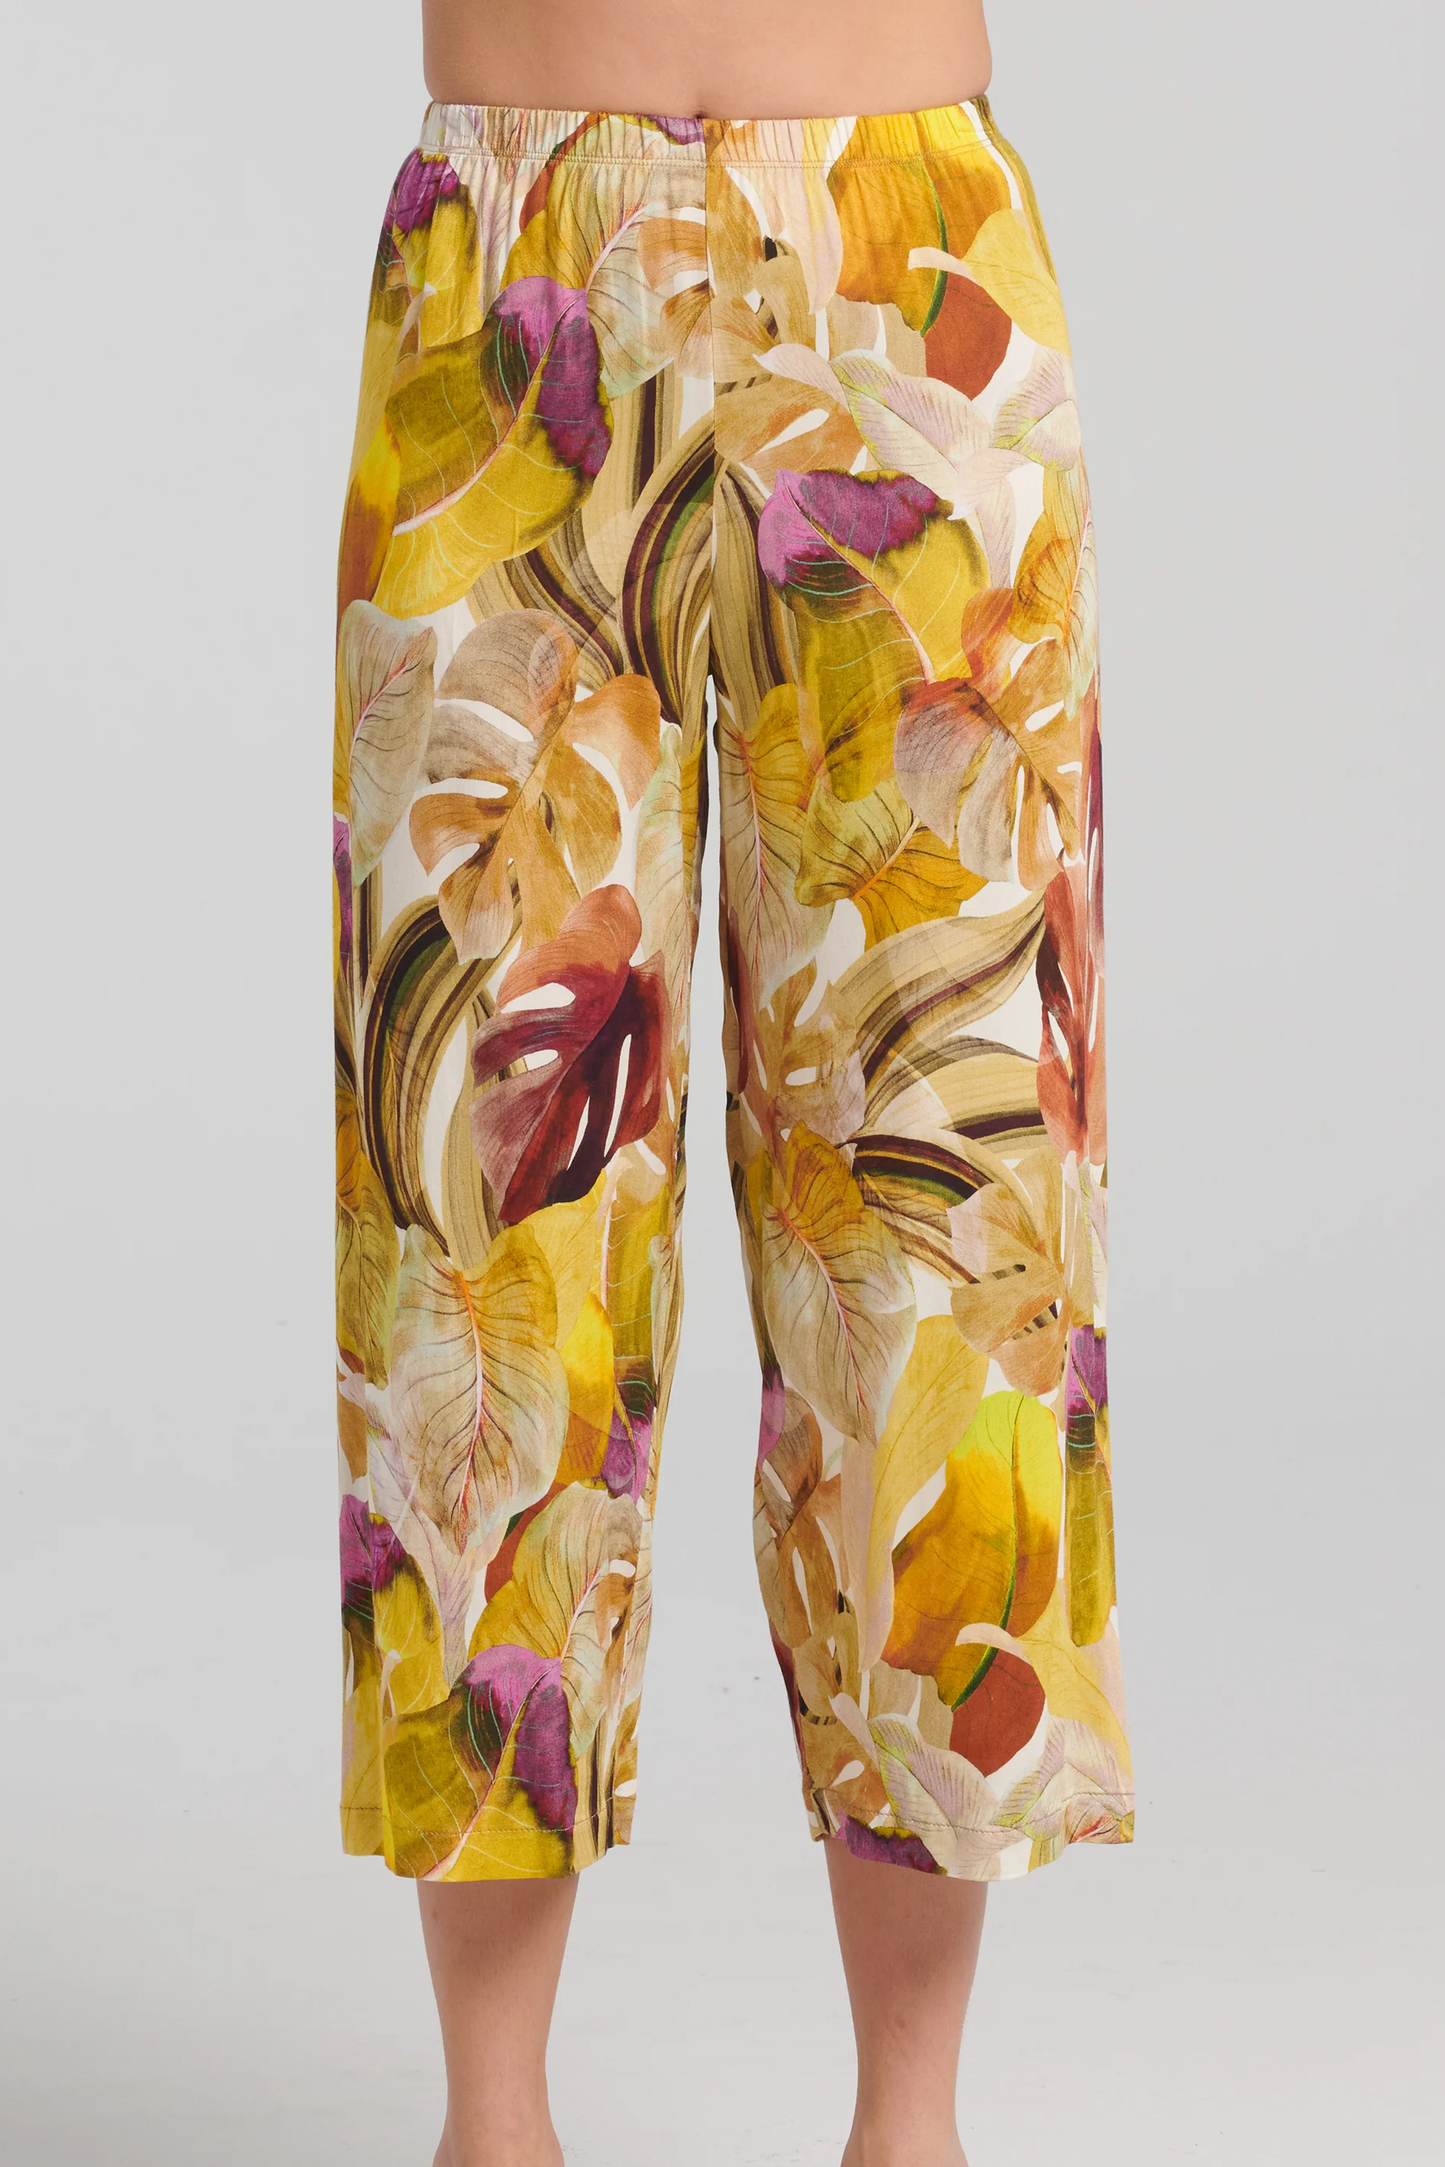 Anjea Pants by Kollontai, Yellow, botanical print, elastic waist, cropped length, slightly wide legs, sizes XS to XXL, made in Montreal 